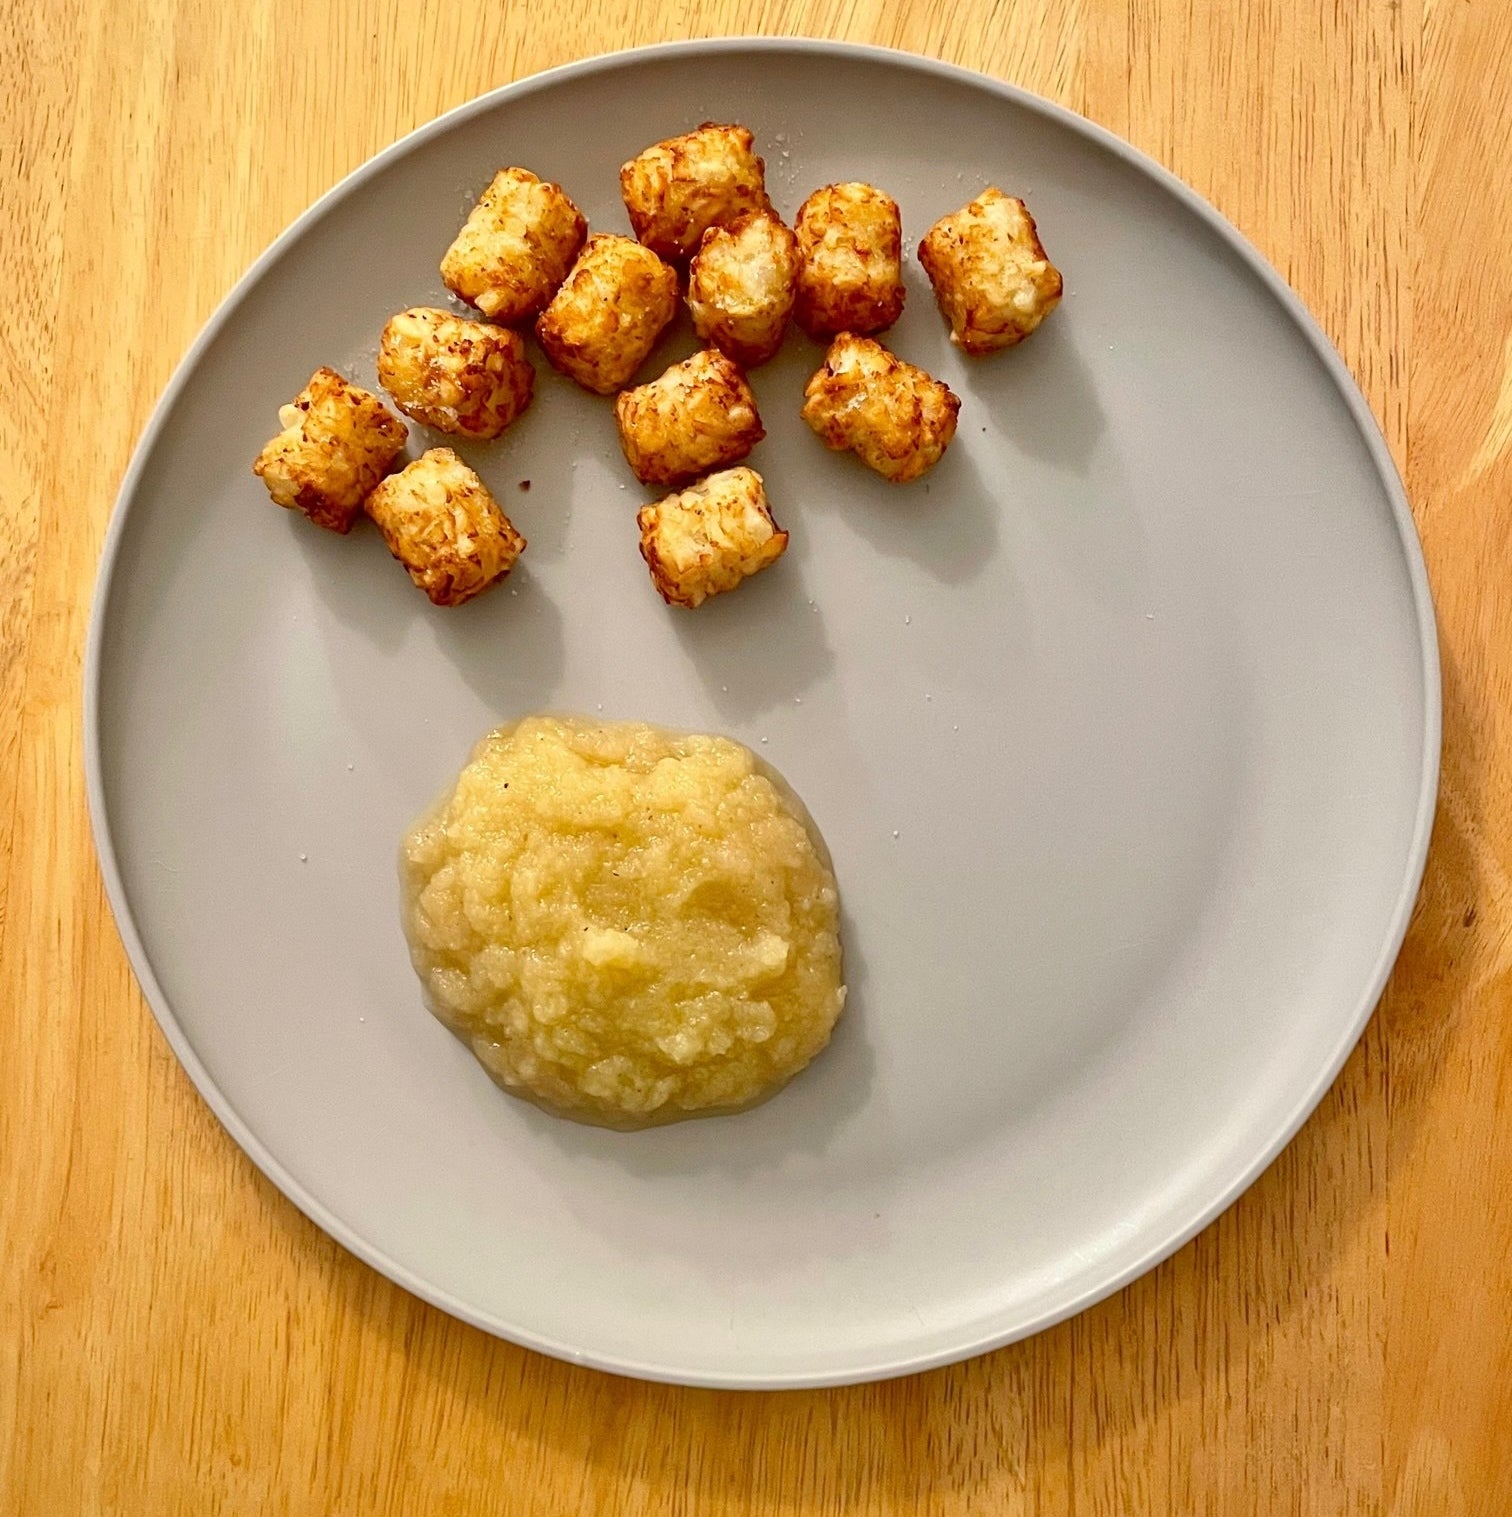 Tater tots and applesauce